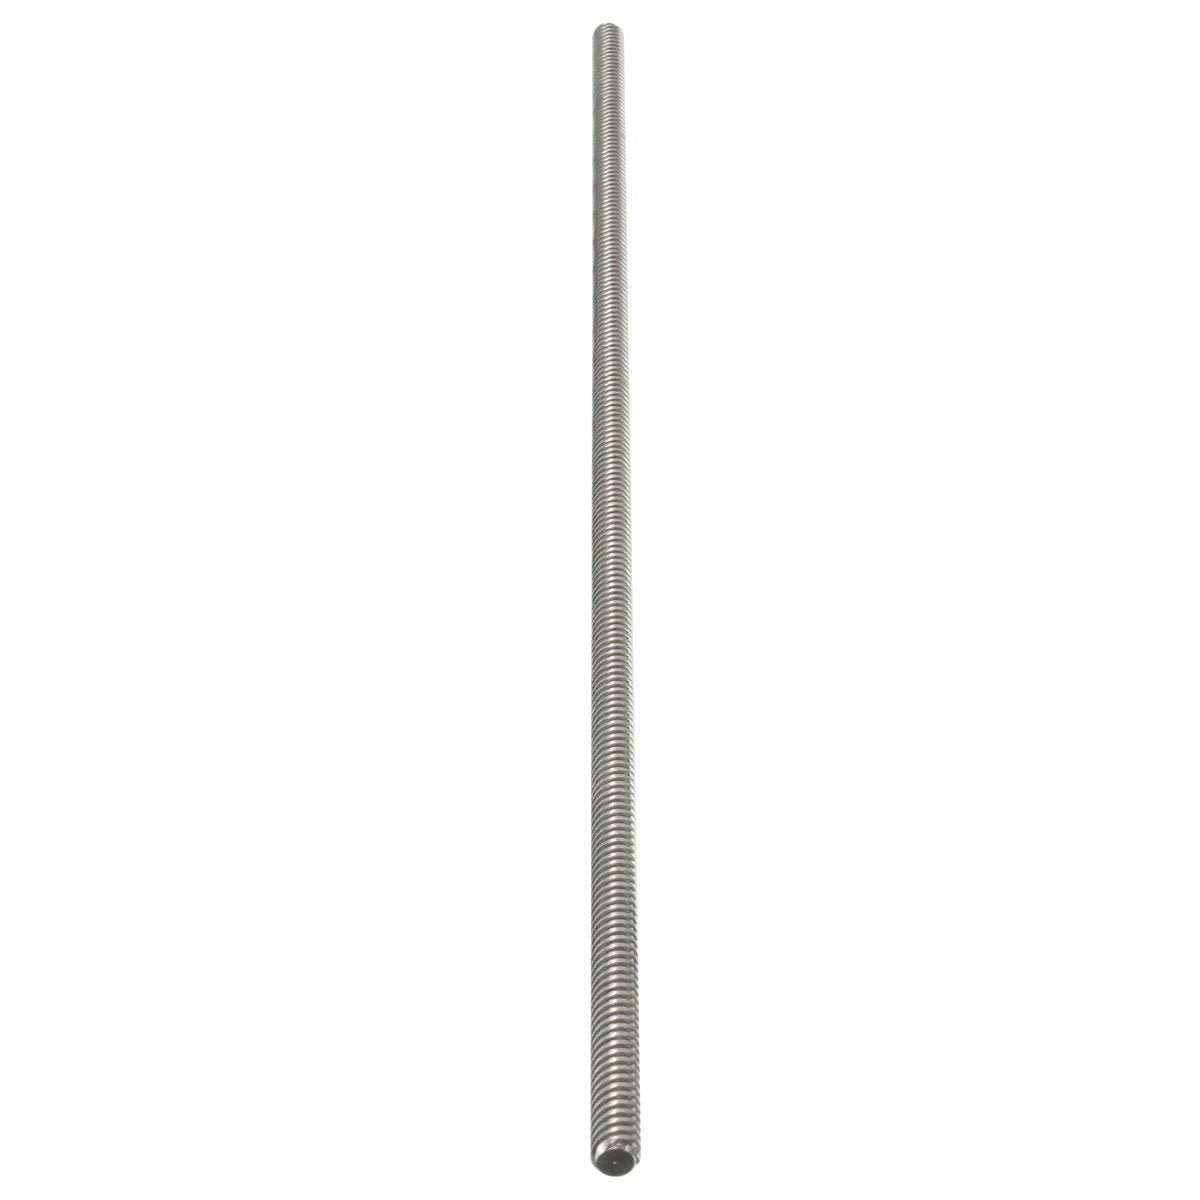 500mm Z-Axis Stainless Steel Threaded Rod Lead Screw with T8 Nut